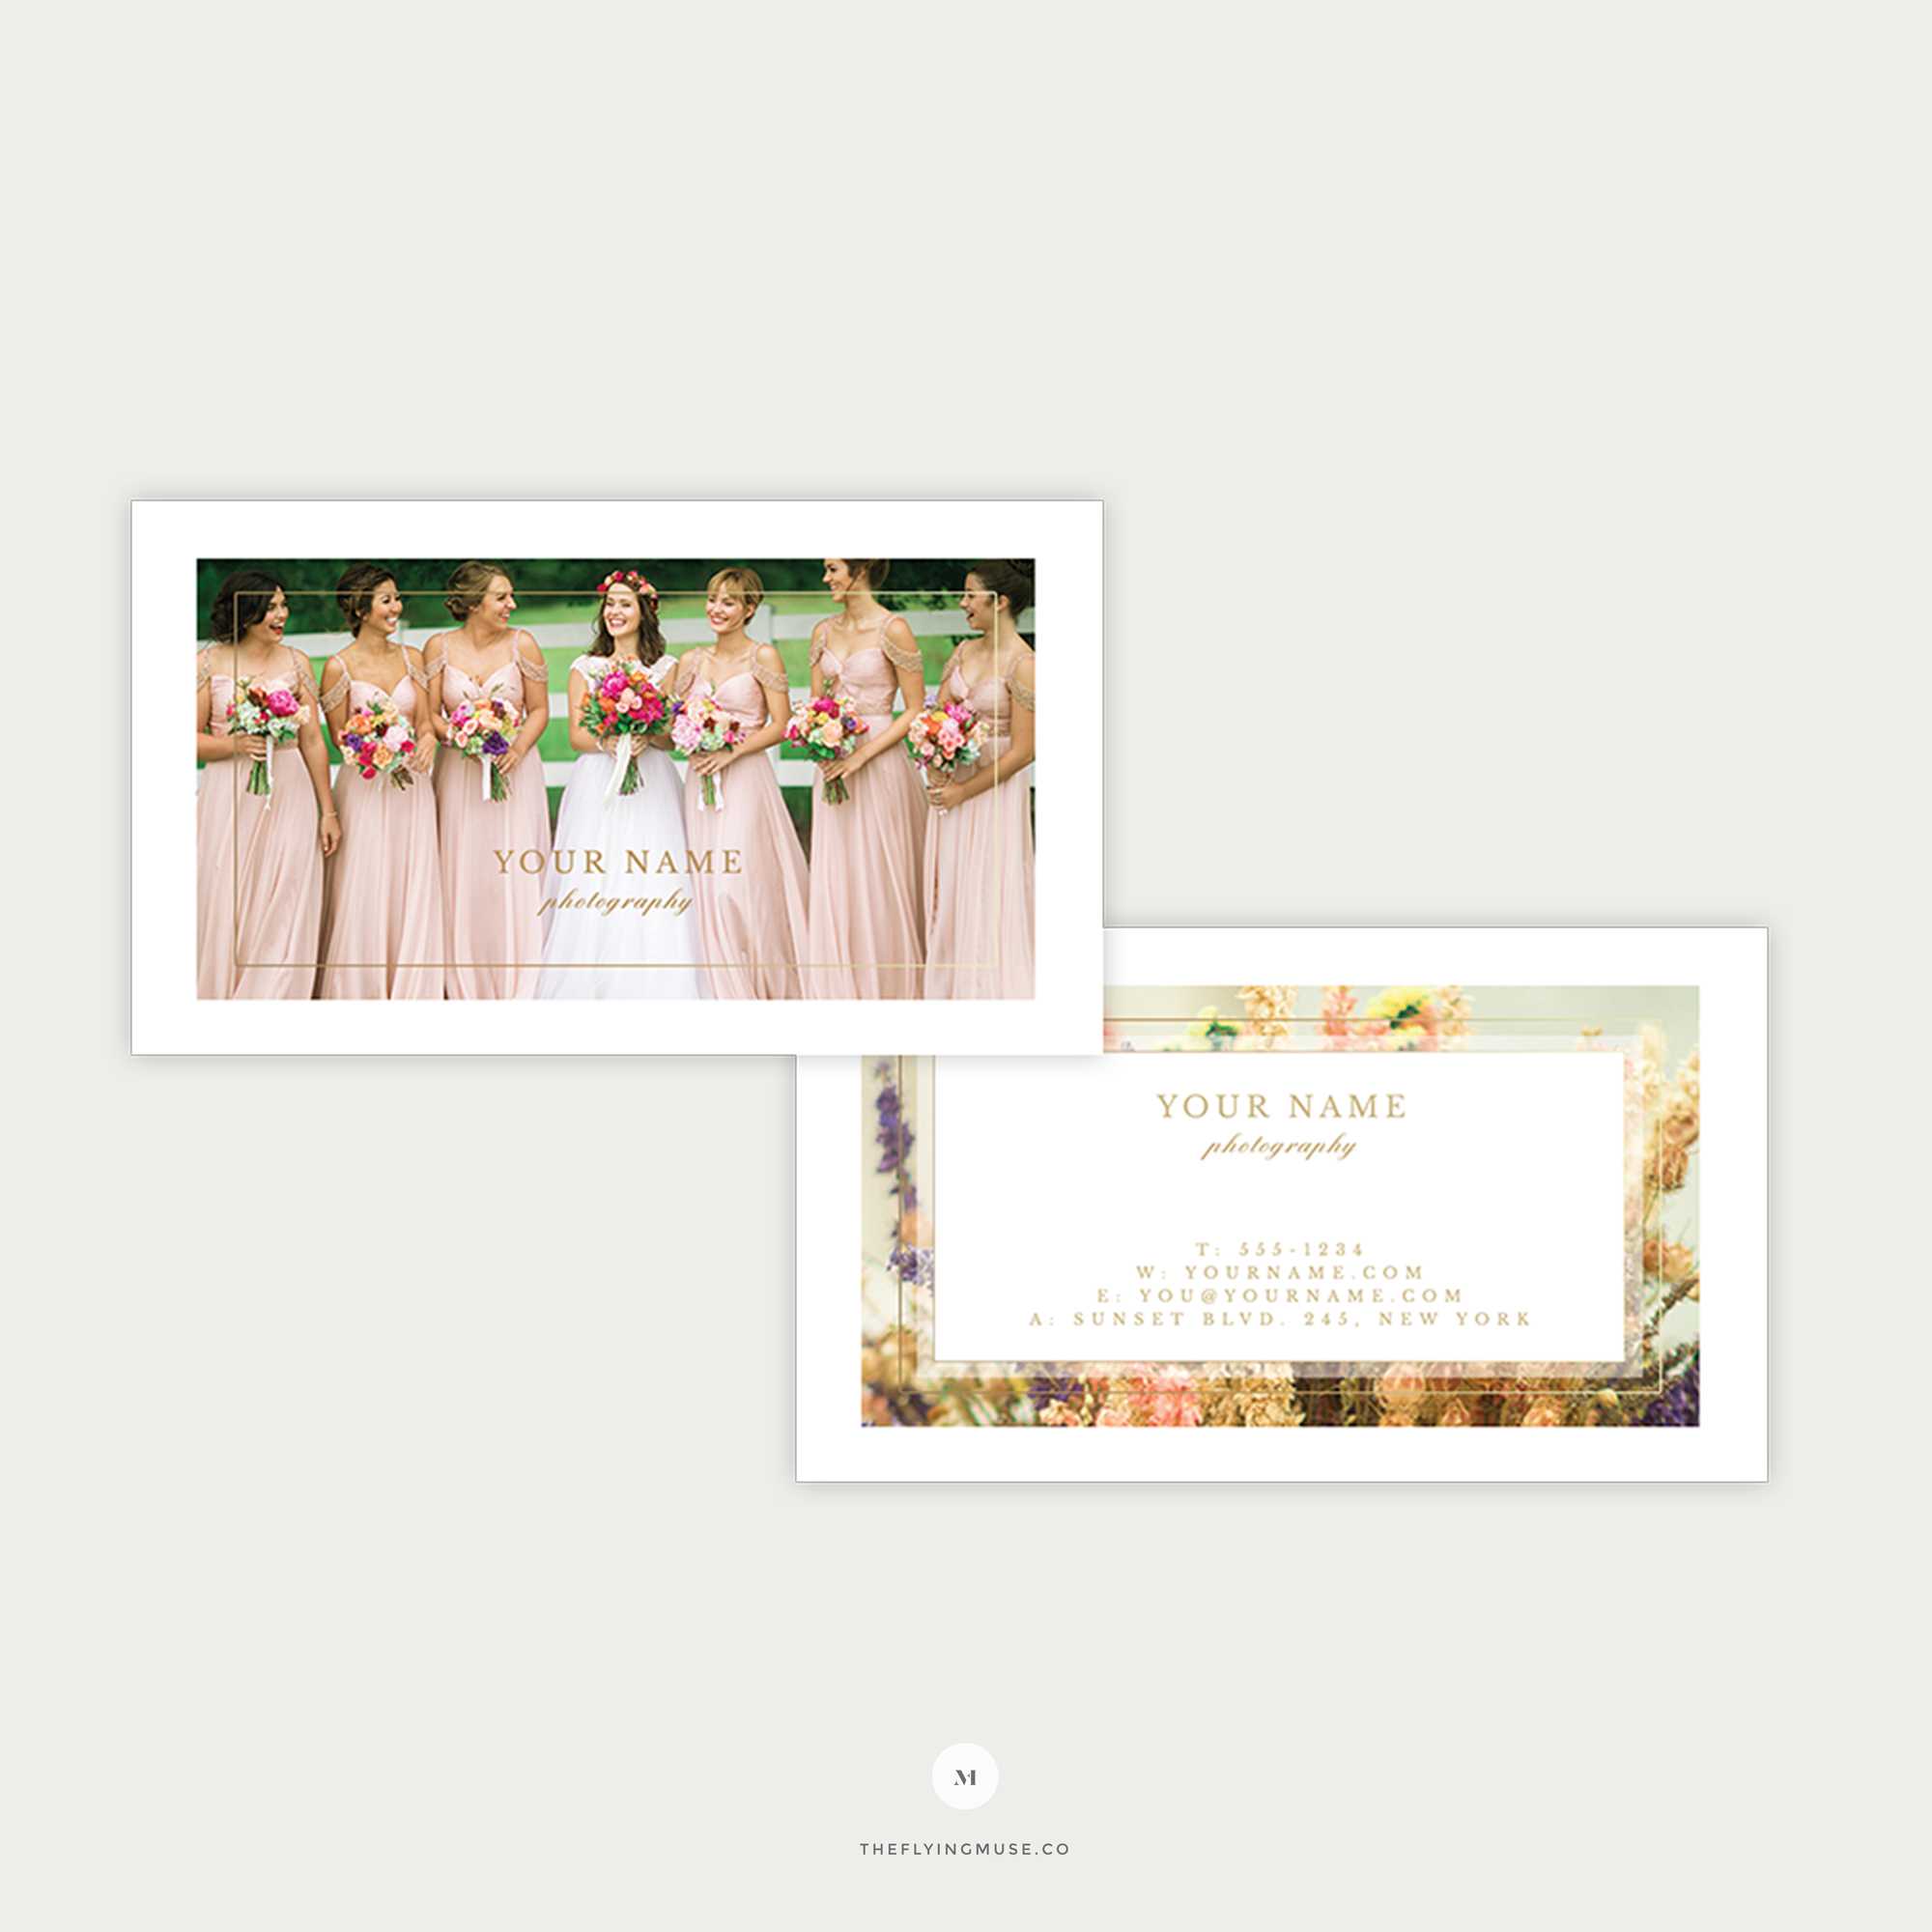 Elegant Wedding Photography Business Card Template | The Flying Muse In Photography Referral Card Templates